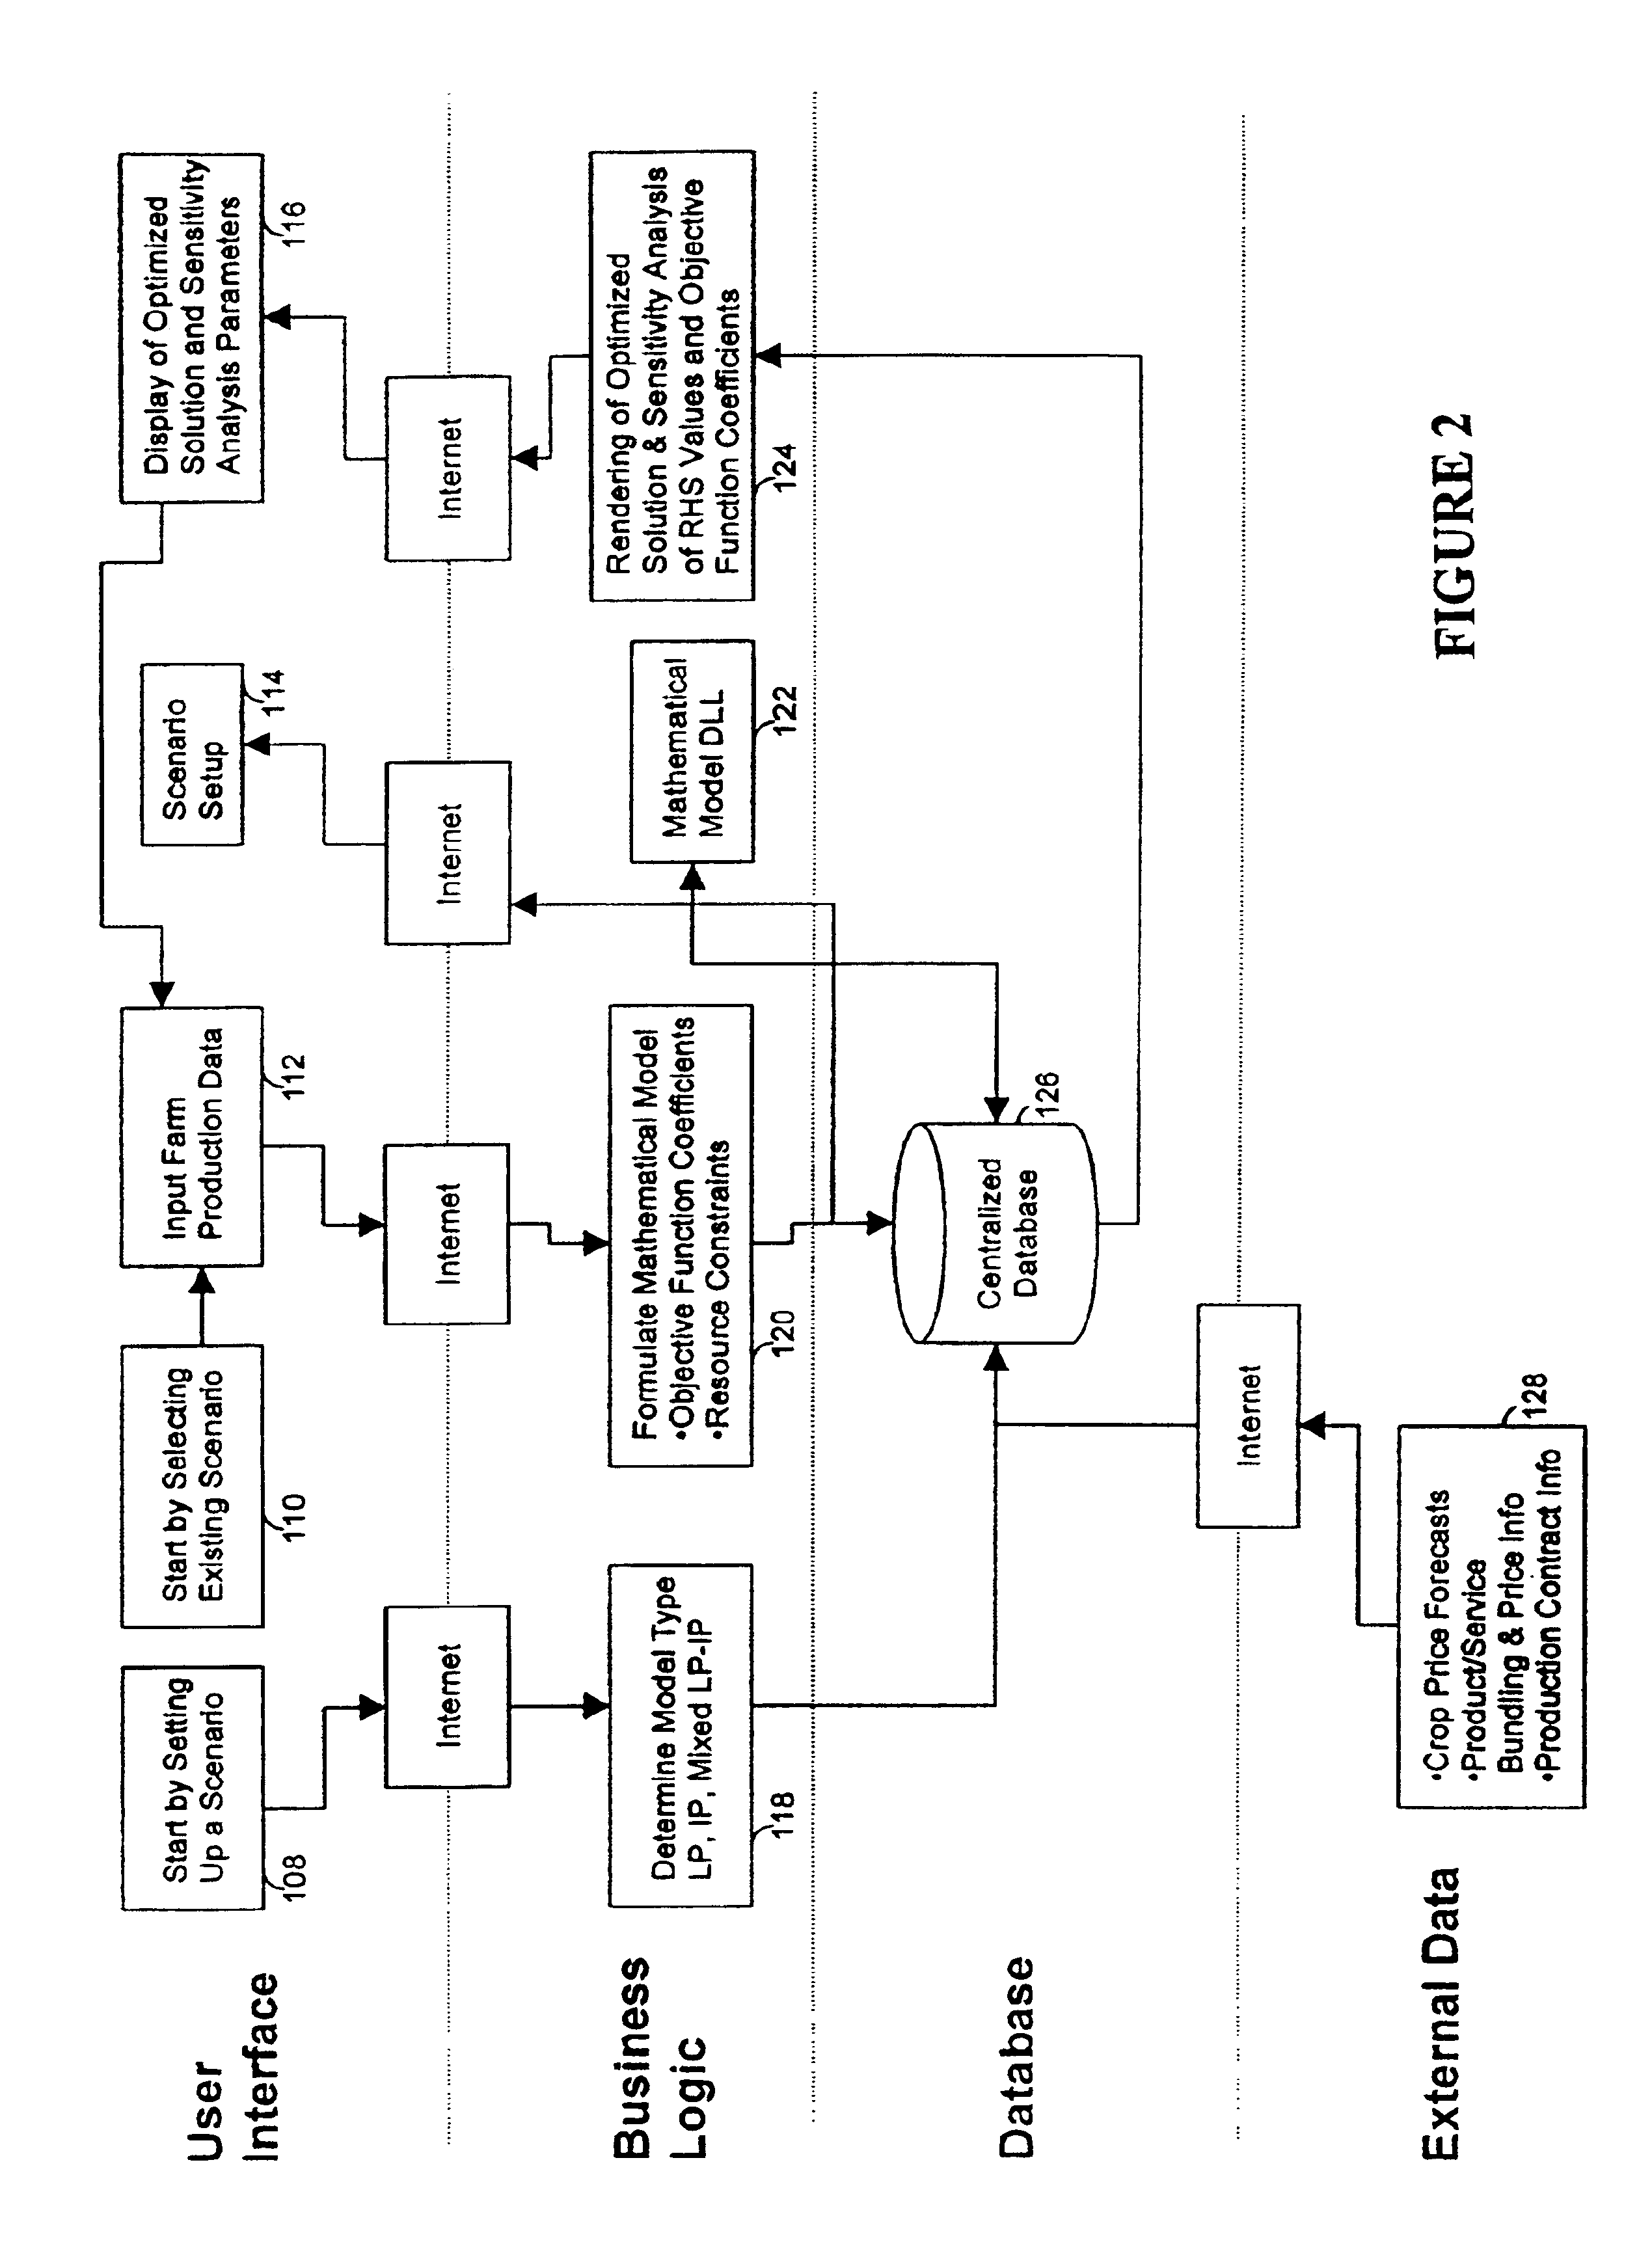 System and method for developing a farm management plan for production agriculture